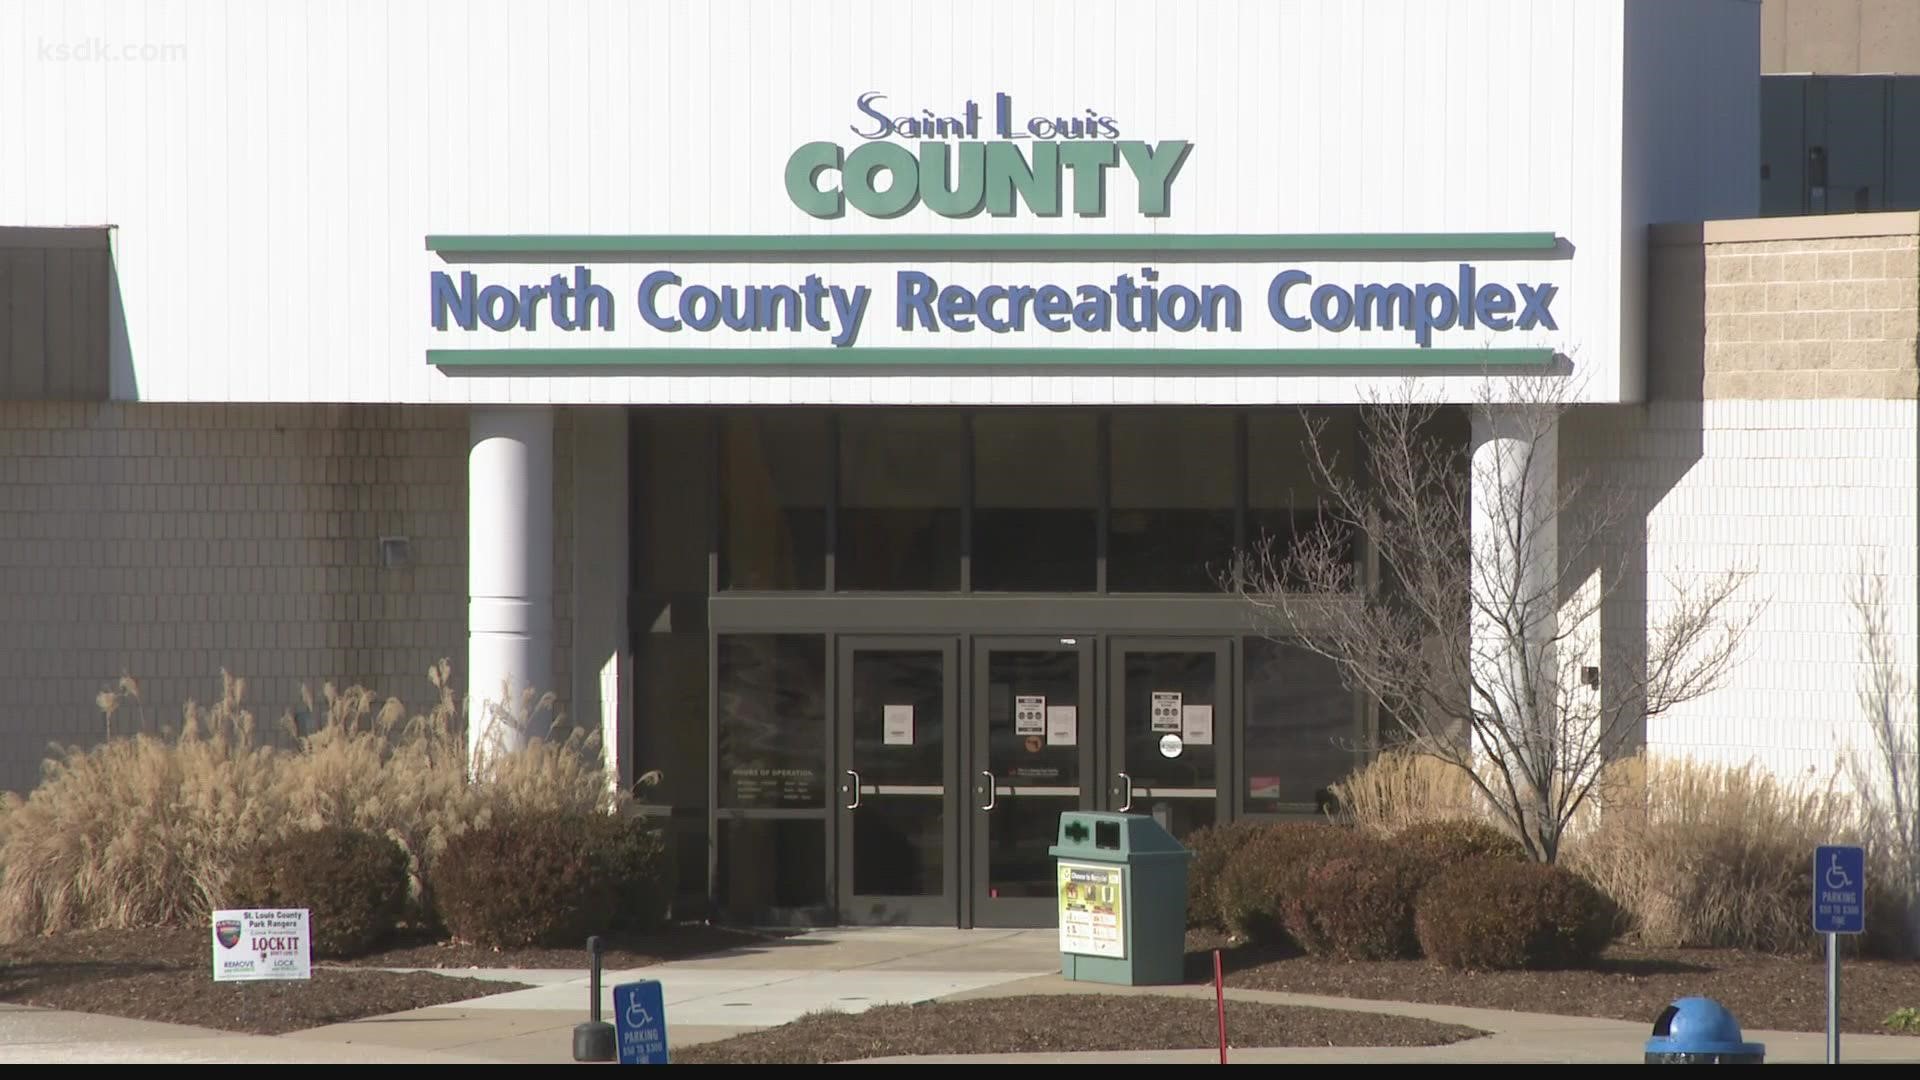 The site at the North County Recreation Complex will expand testing capacity by 1,000 tests per week.